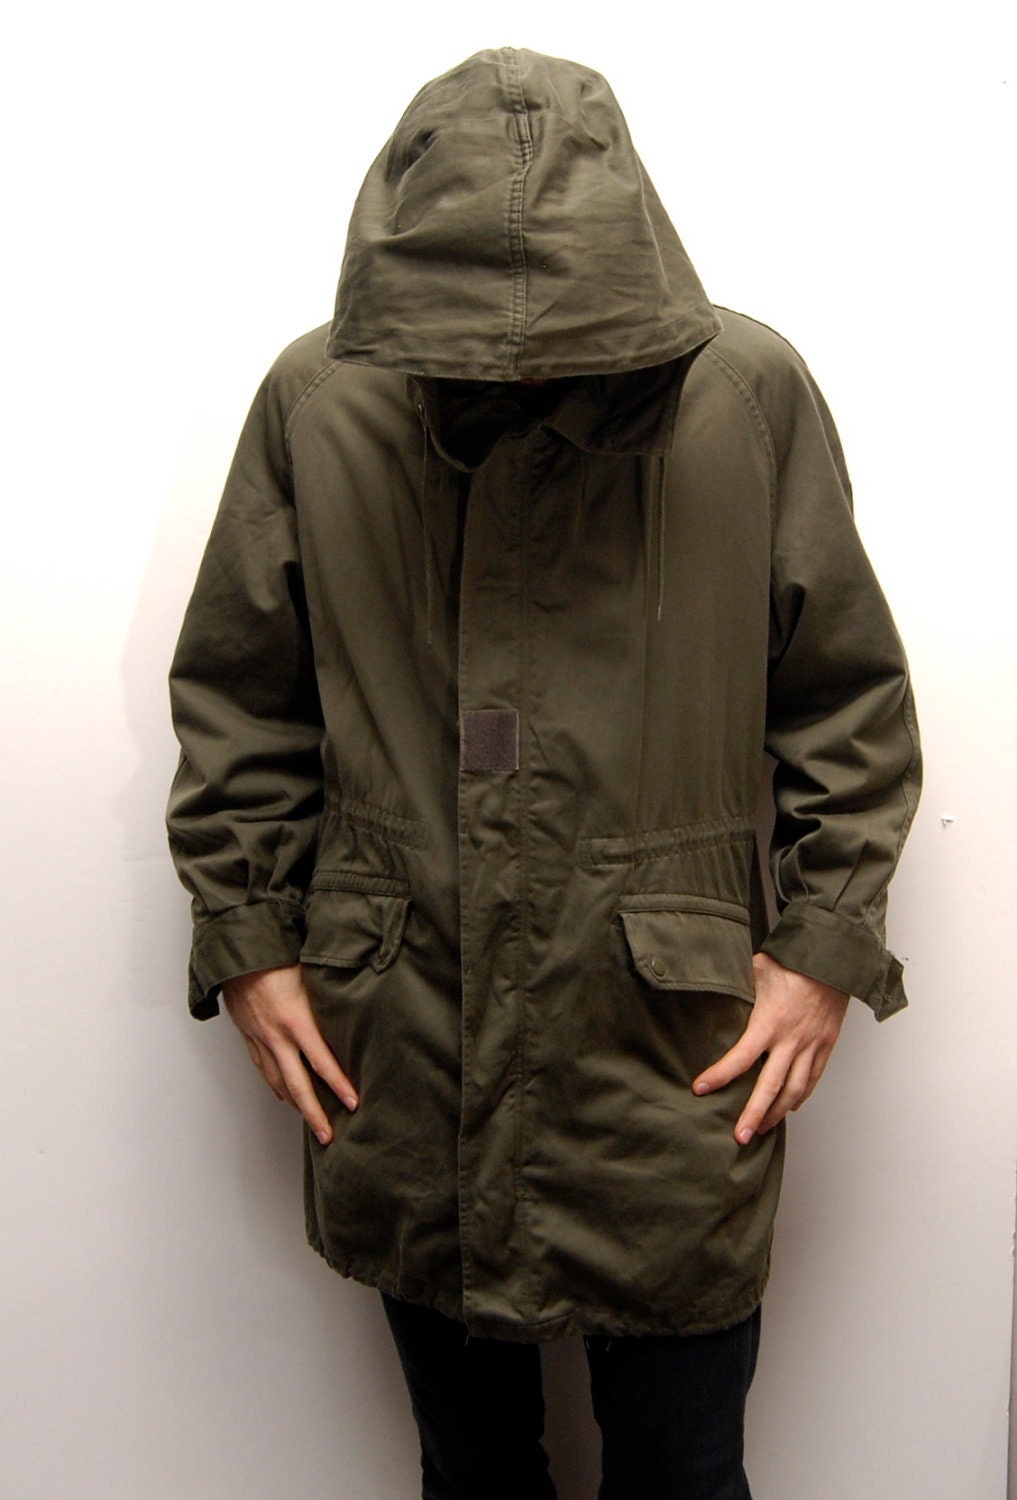 FRENCH PARKA large hooded military SHERPA lined long winter